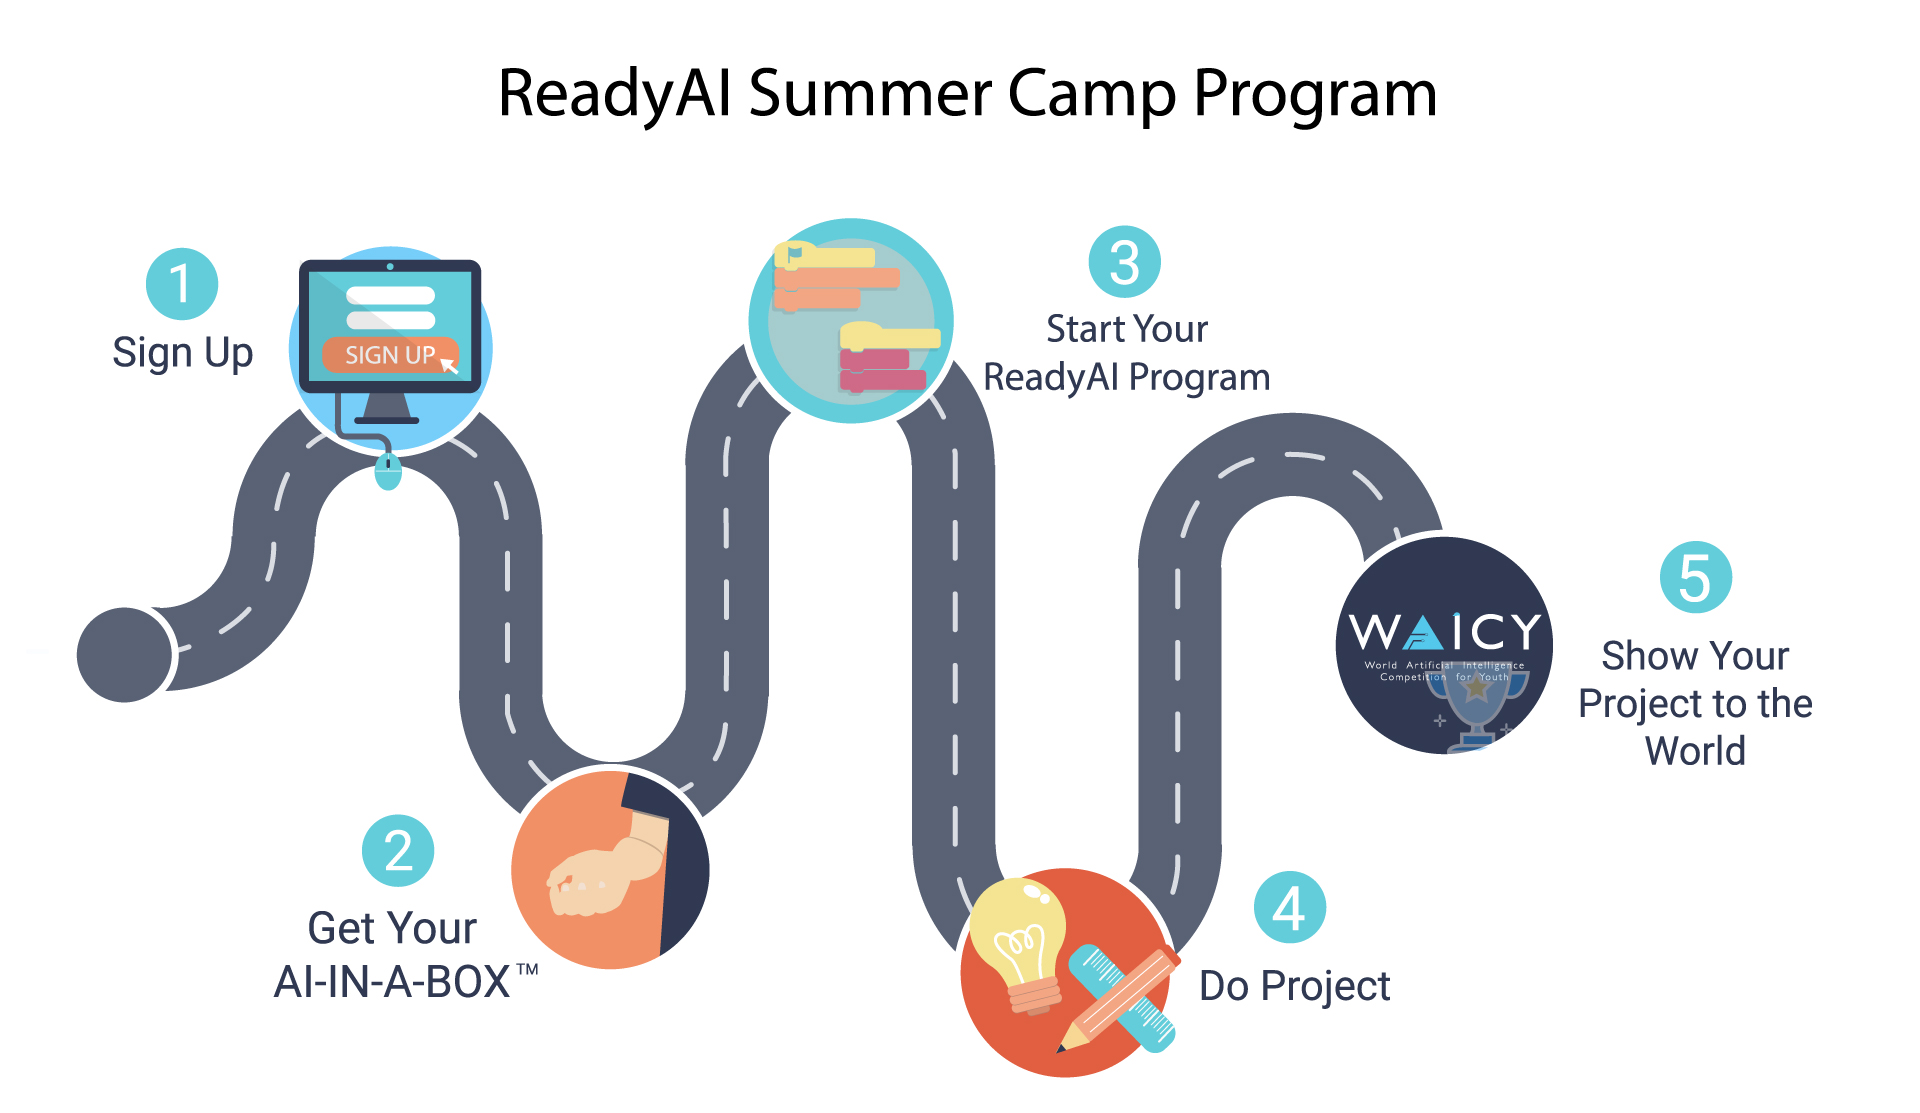 ReadyAI Launches First Real Handson AI Summer Camp Experience